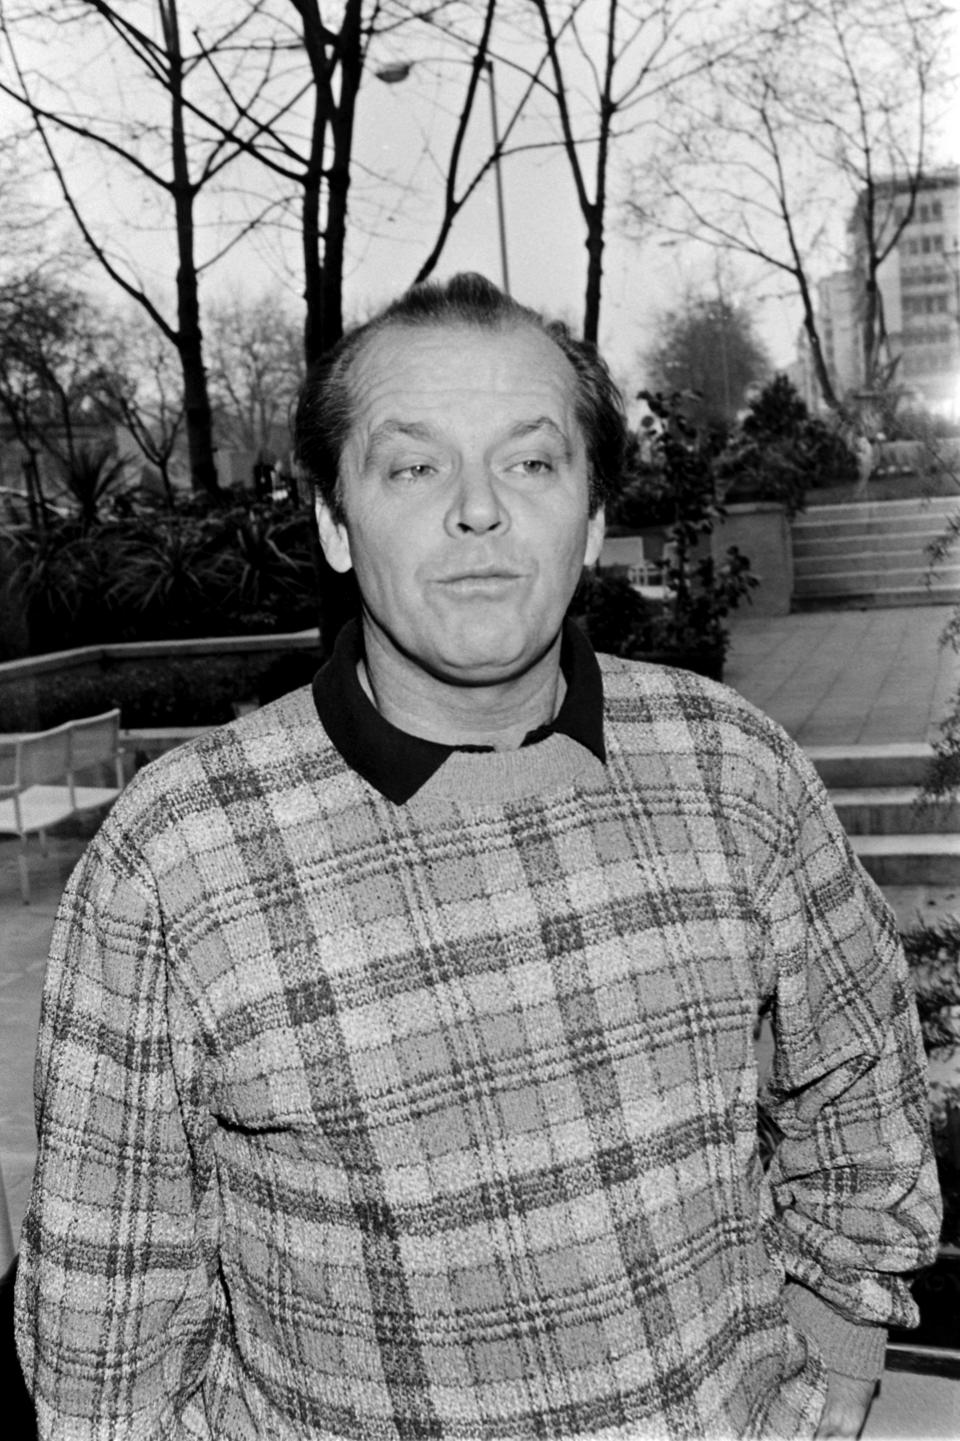 A man in a plaid jacket makes a playful face at the camera